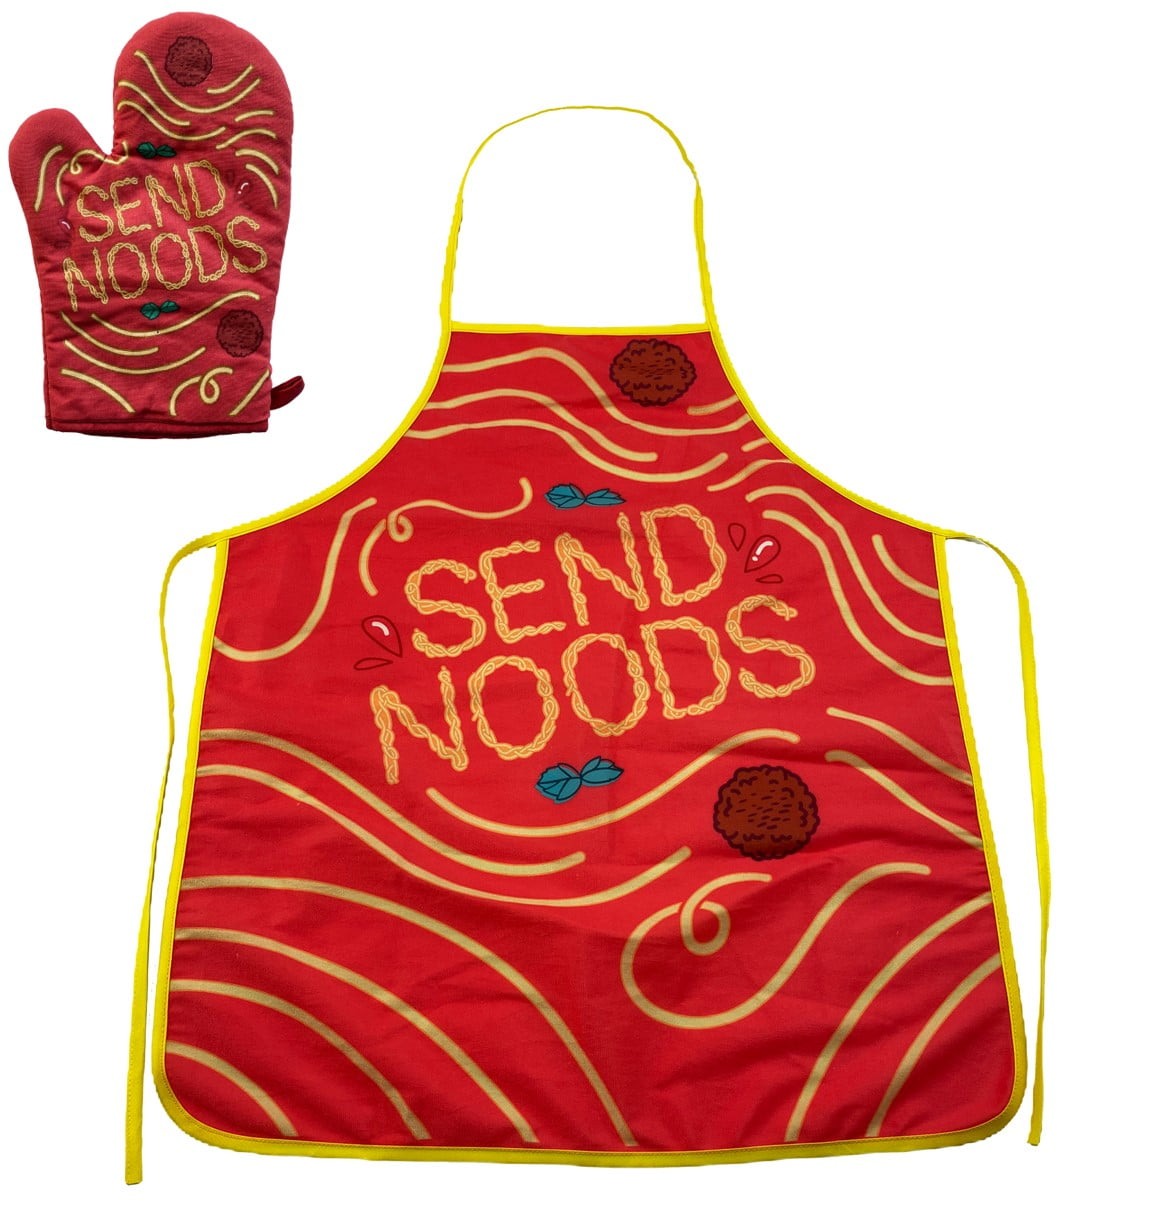 Fitness Taco Funny Kitchen Apron and Oven Mitts Humorous Gym Graphic  Novelty Cooking Accessories (Oven Mitt) 